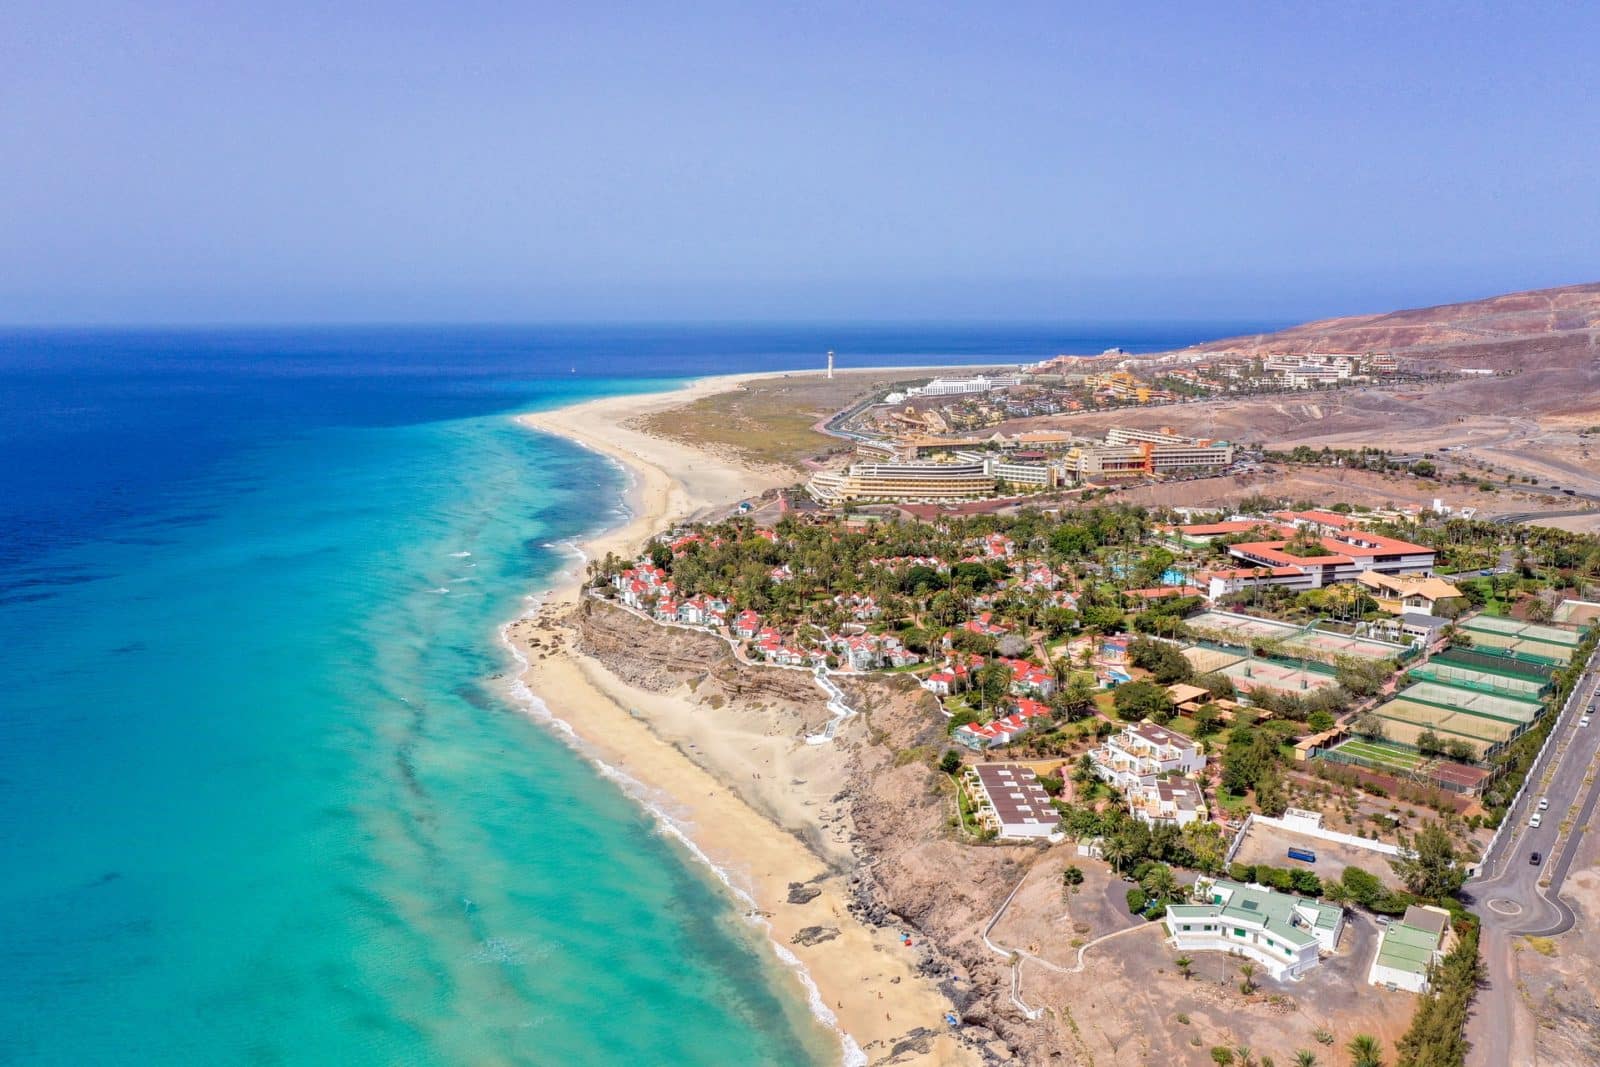 The Best Areas to Stay in Fuerteventura, Canary Islands